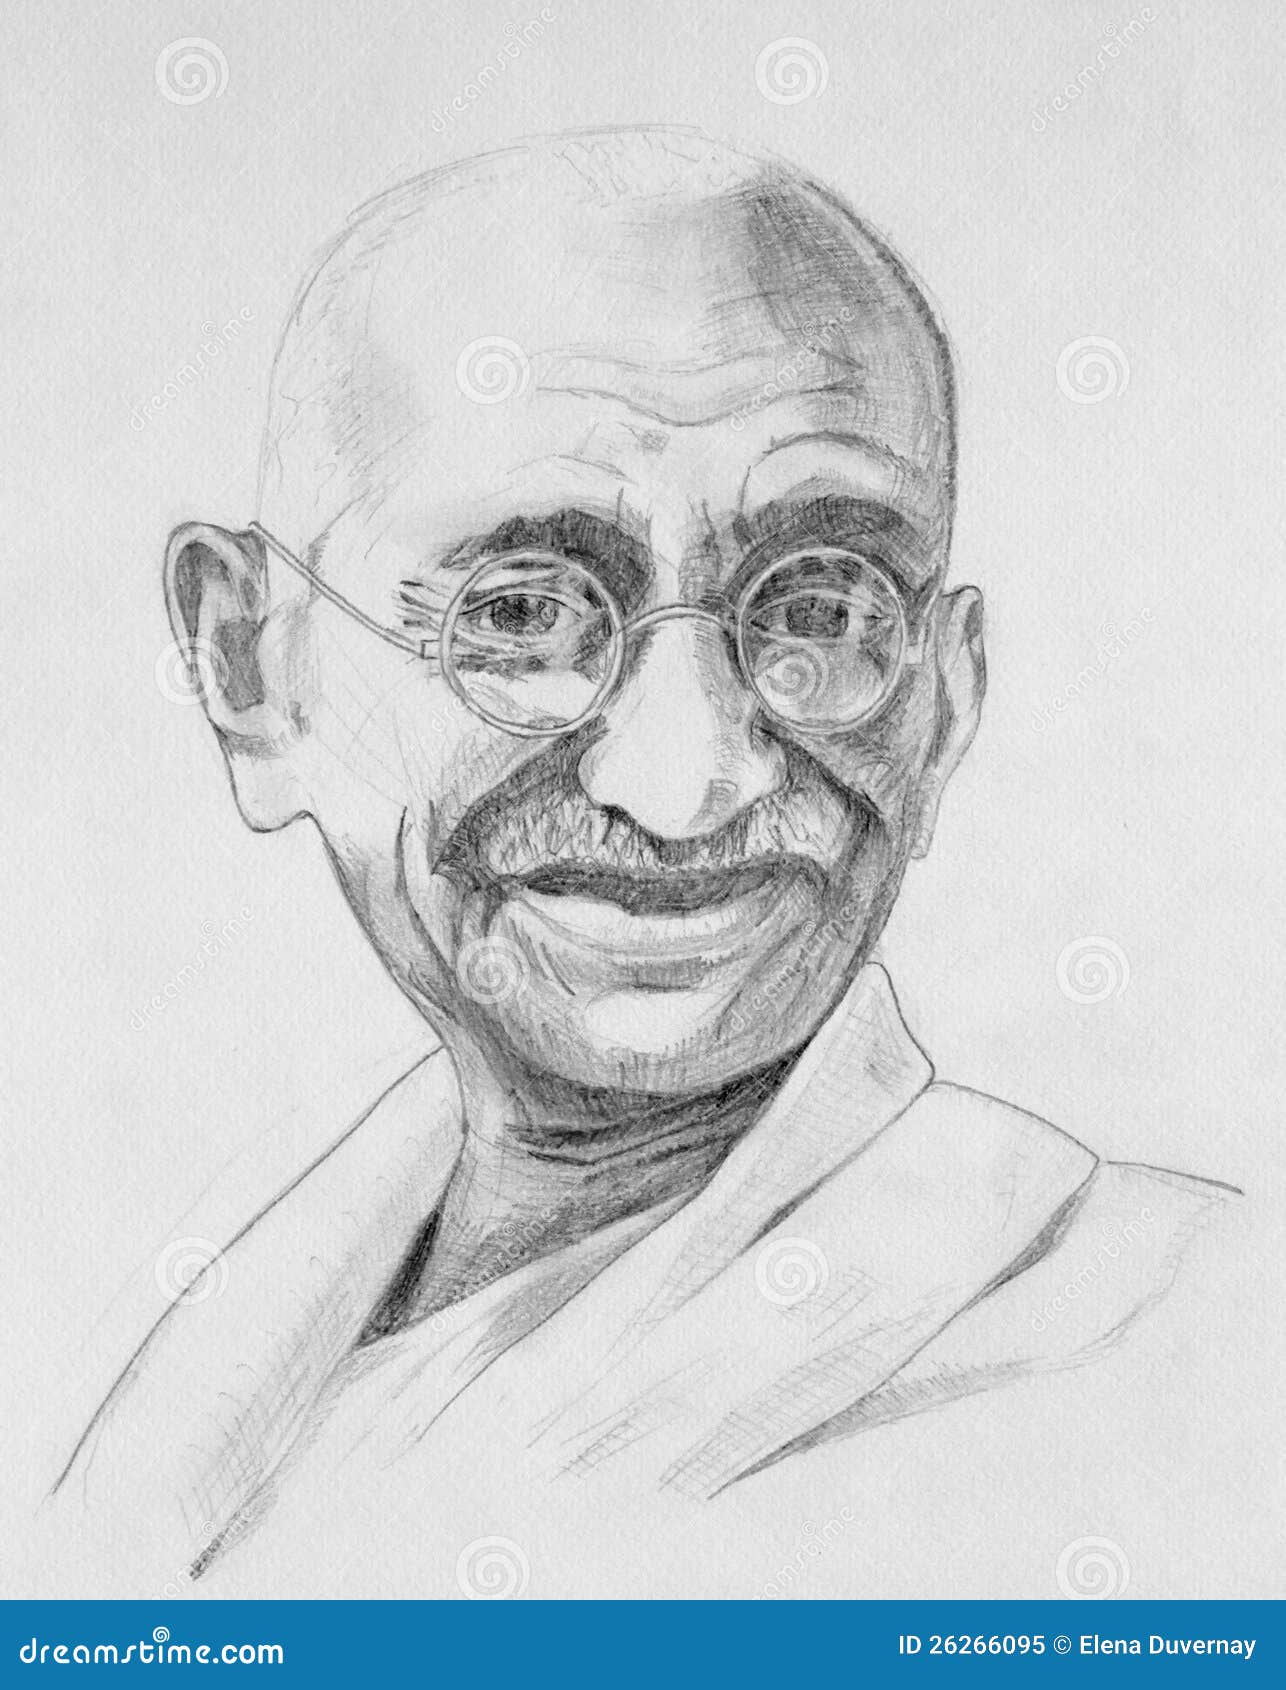 How to draw Mahatma Gandhi step by step by mlspcart on DeviantArt